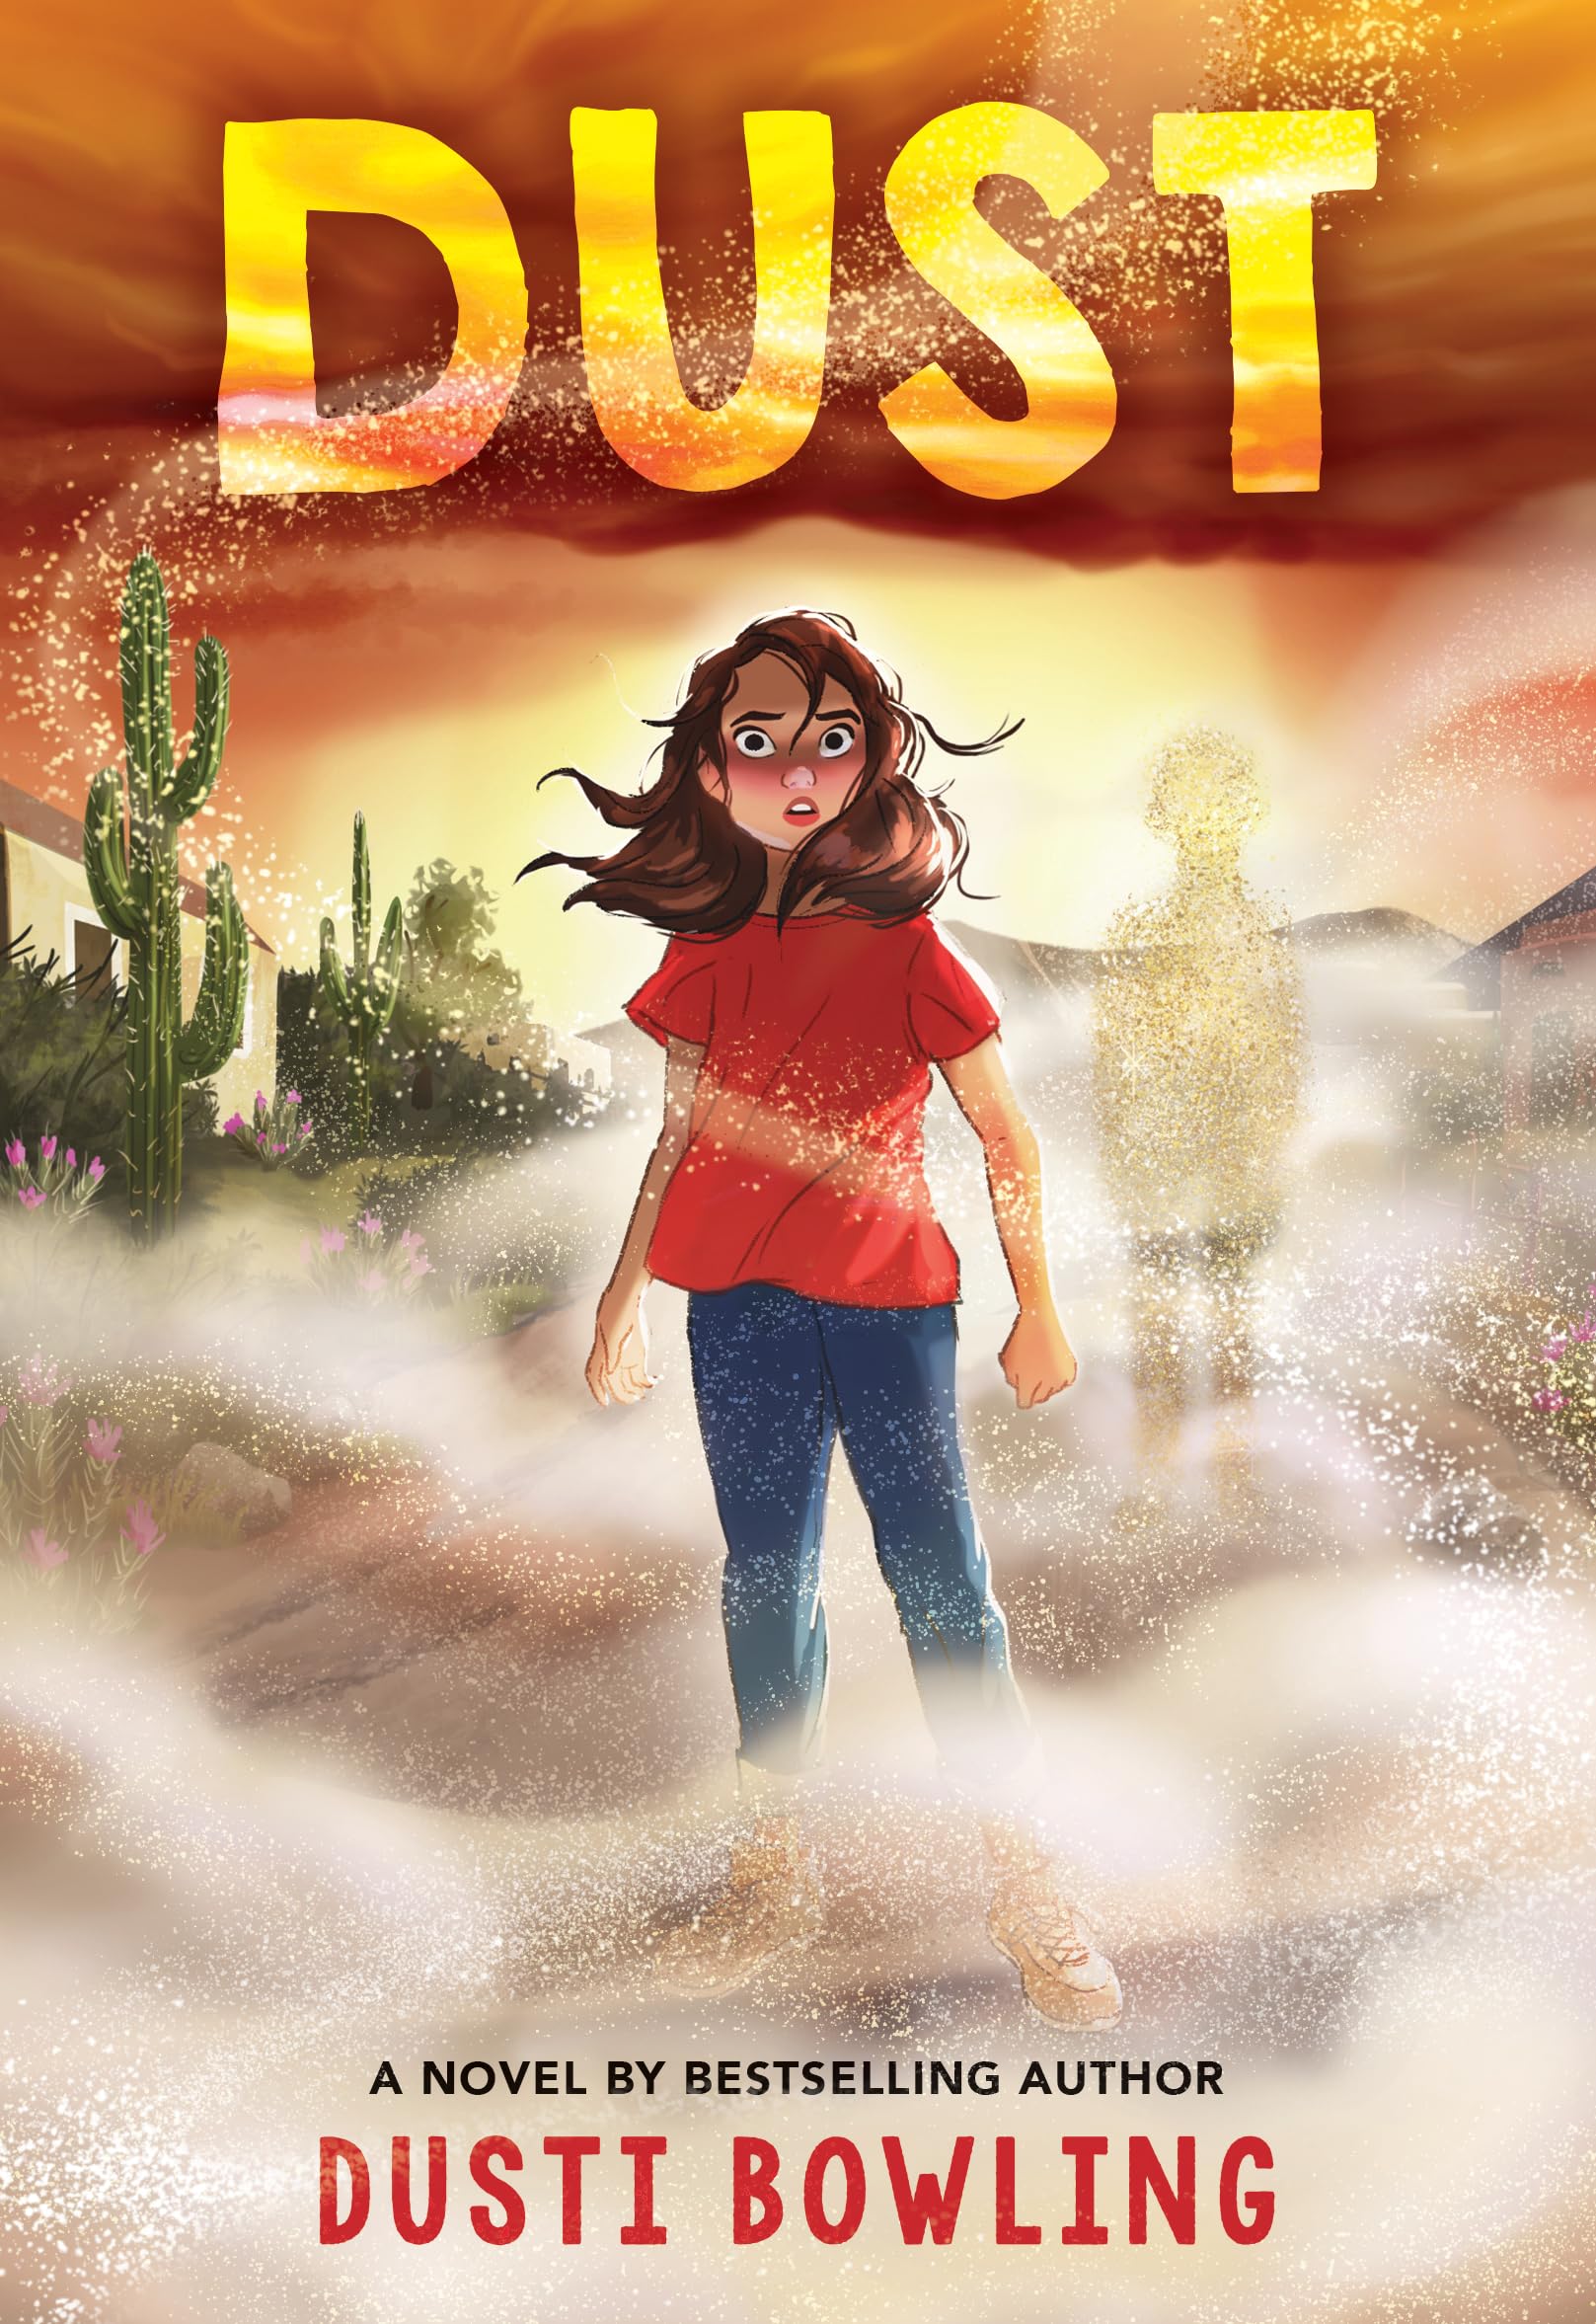 One of our recommended books is Dust by Dusti Bowling